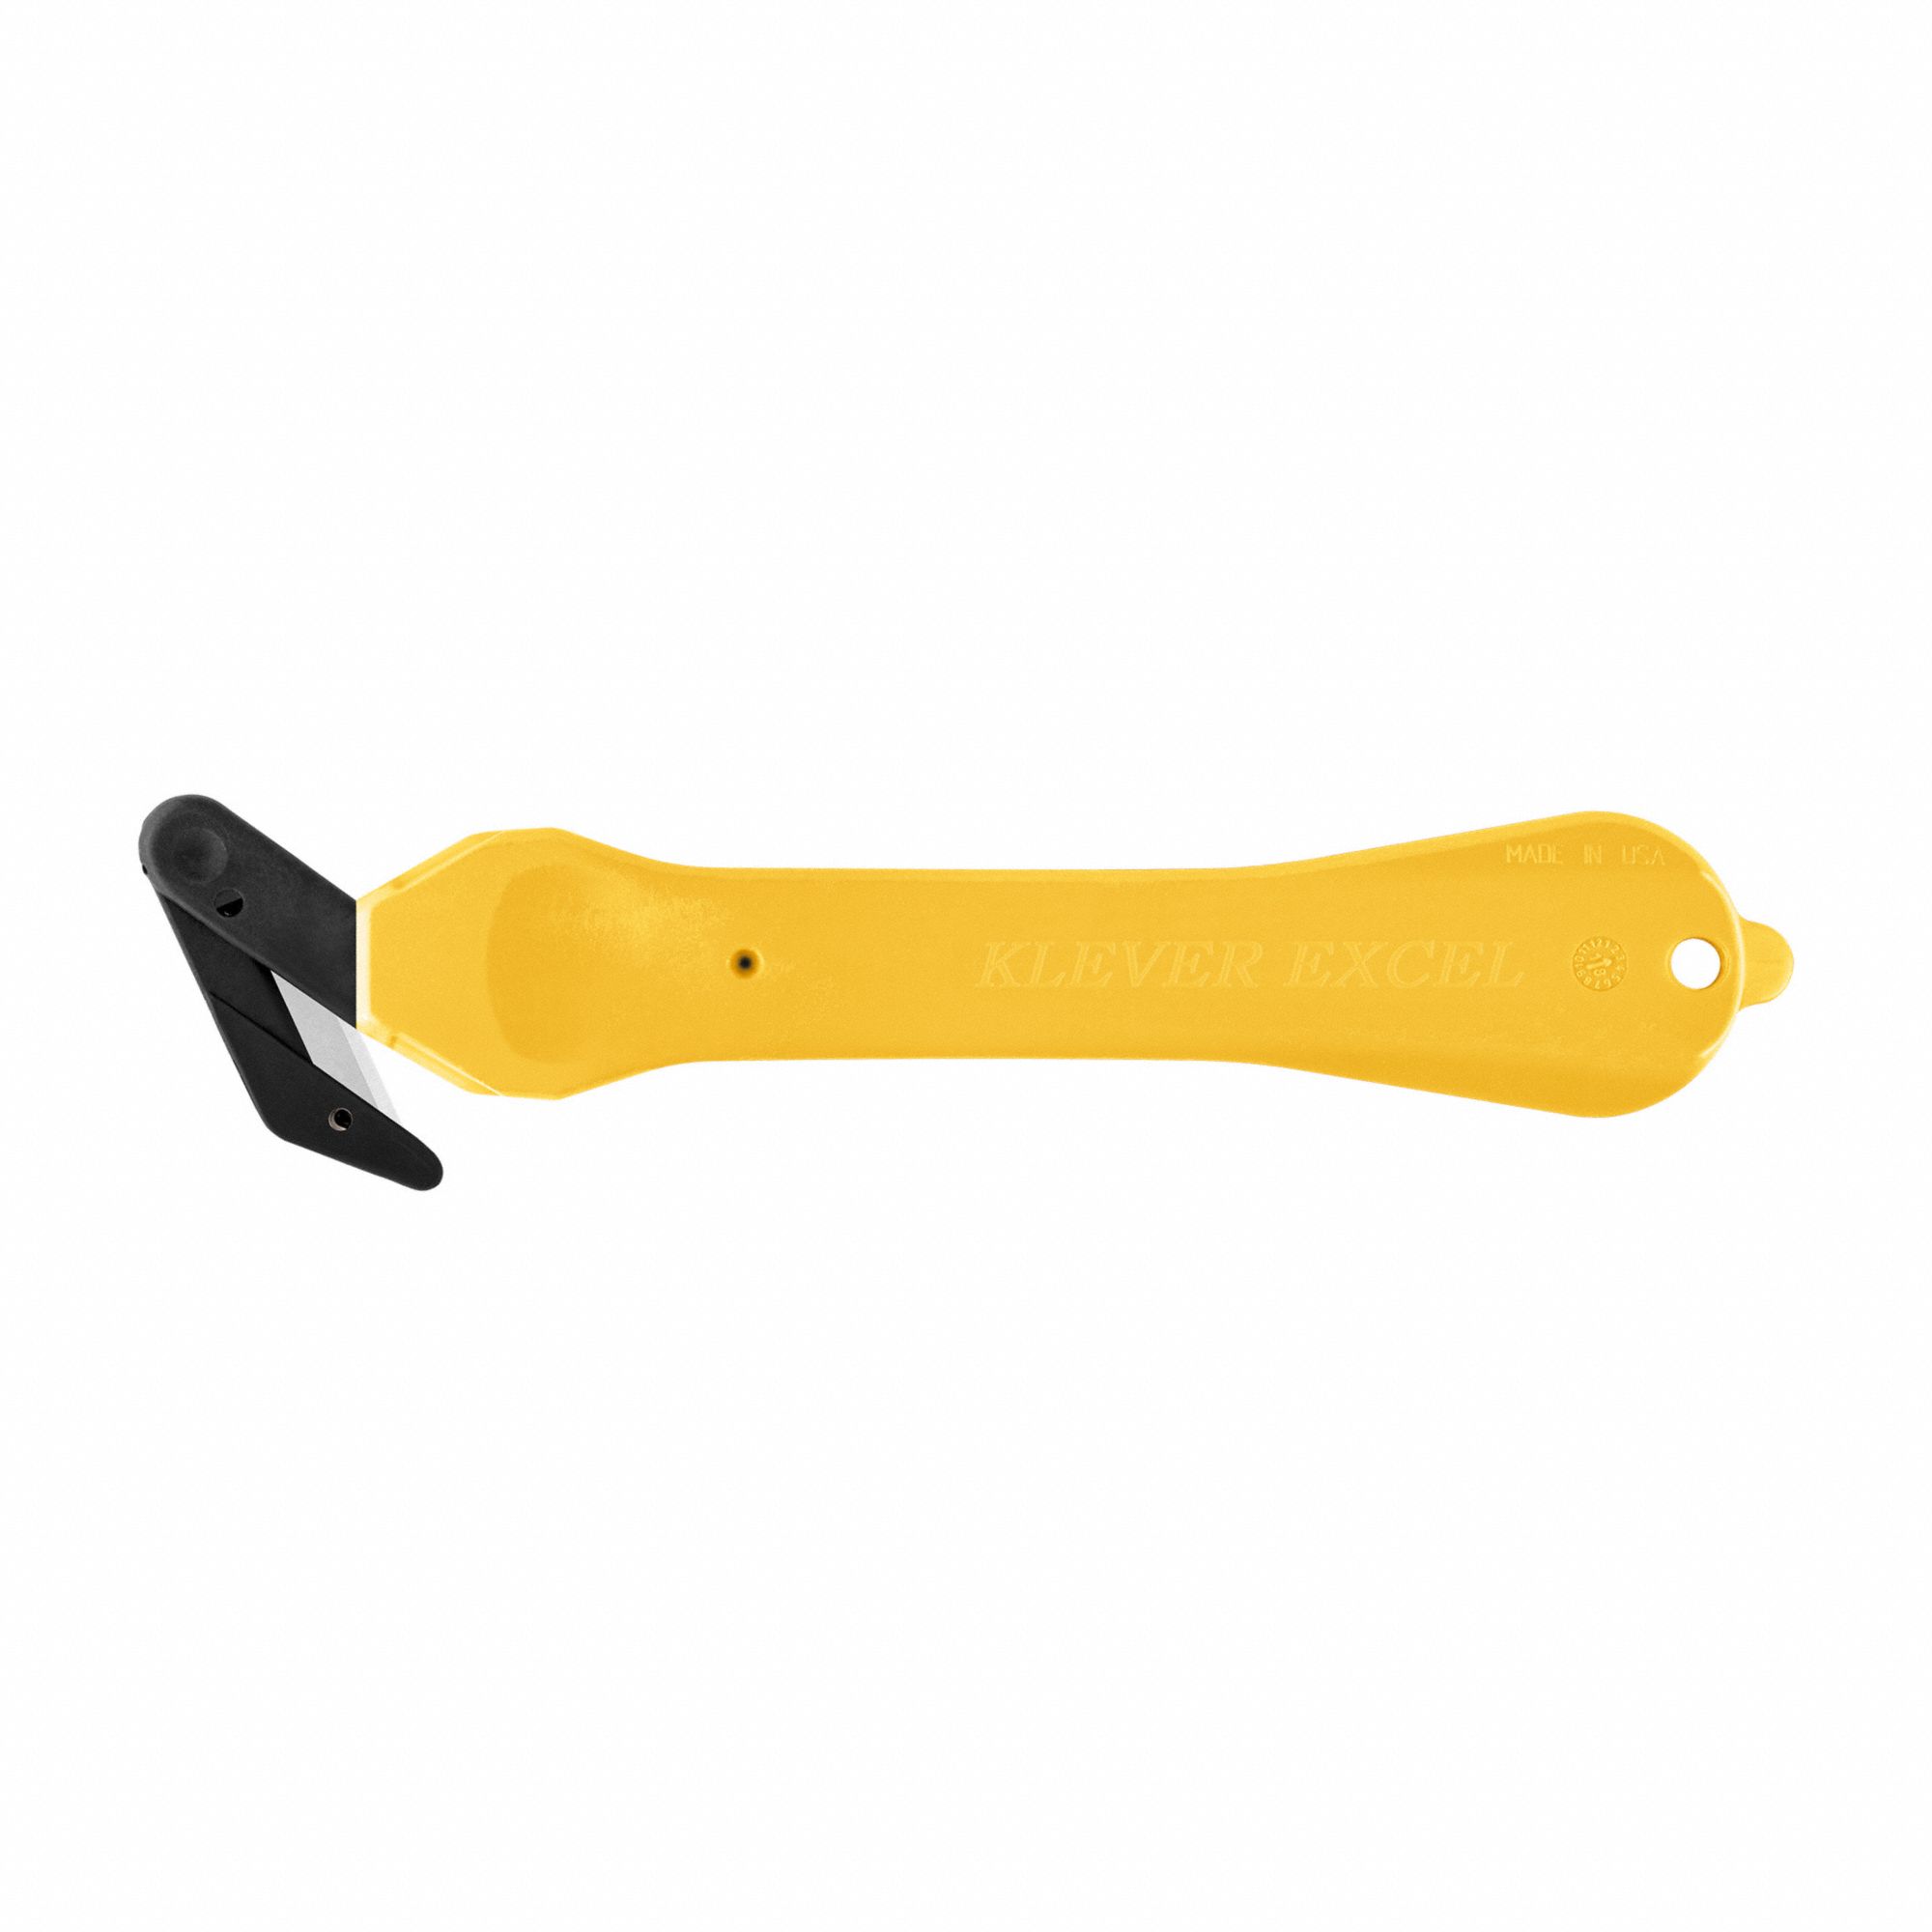 Hd Sales Group Inc Swift Safety Cutter with enclosed moving blade